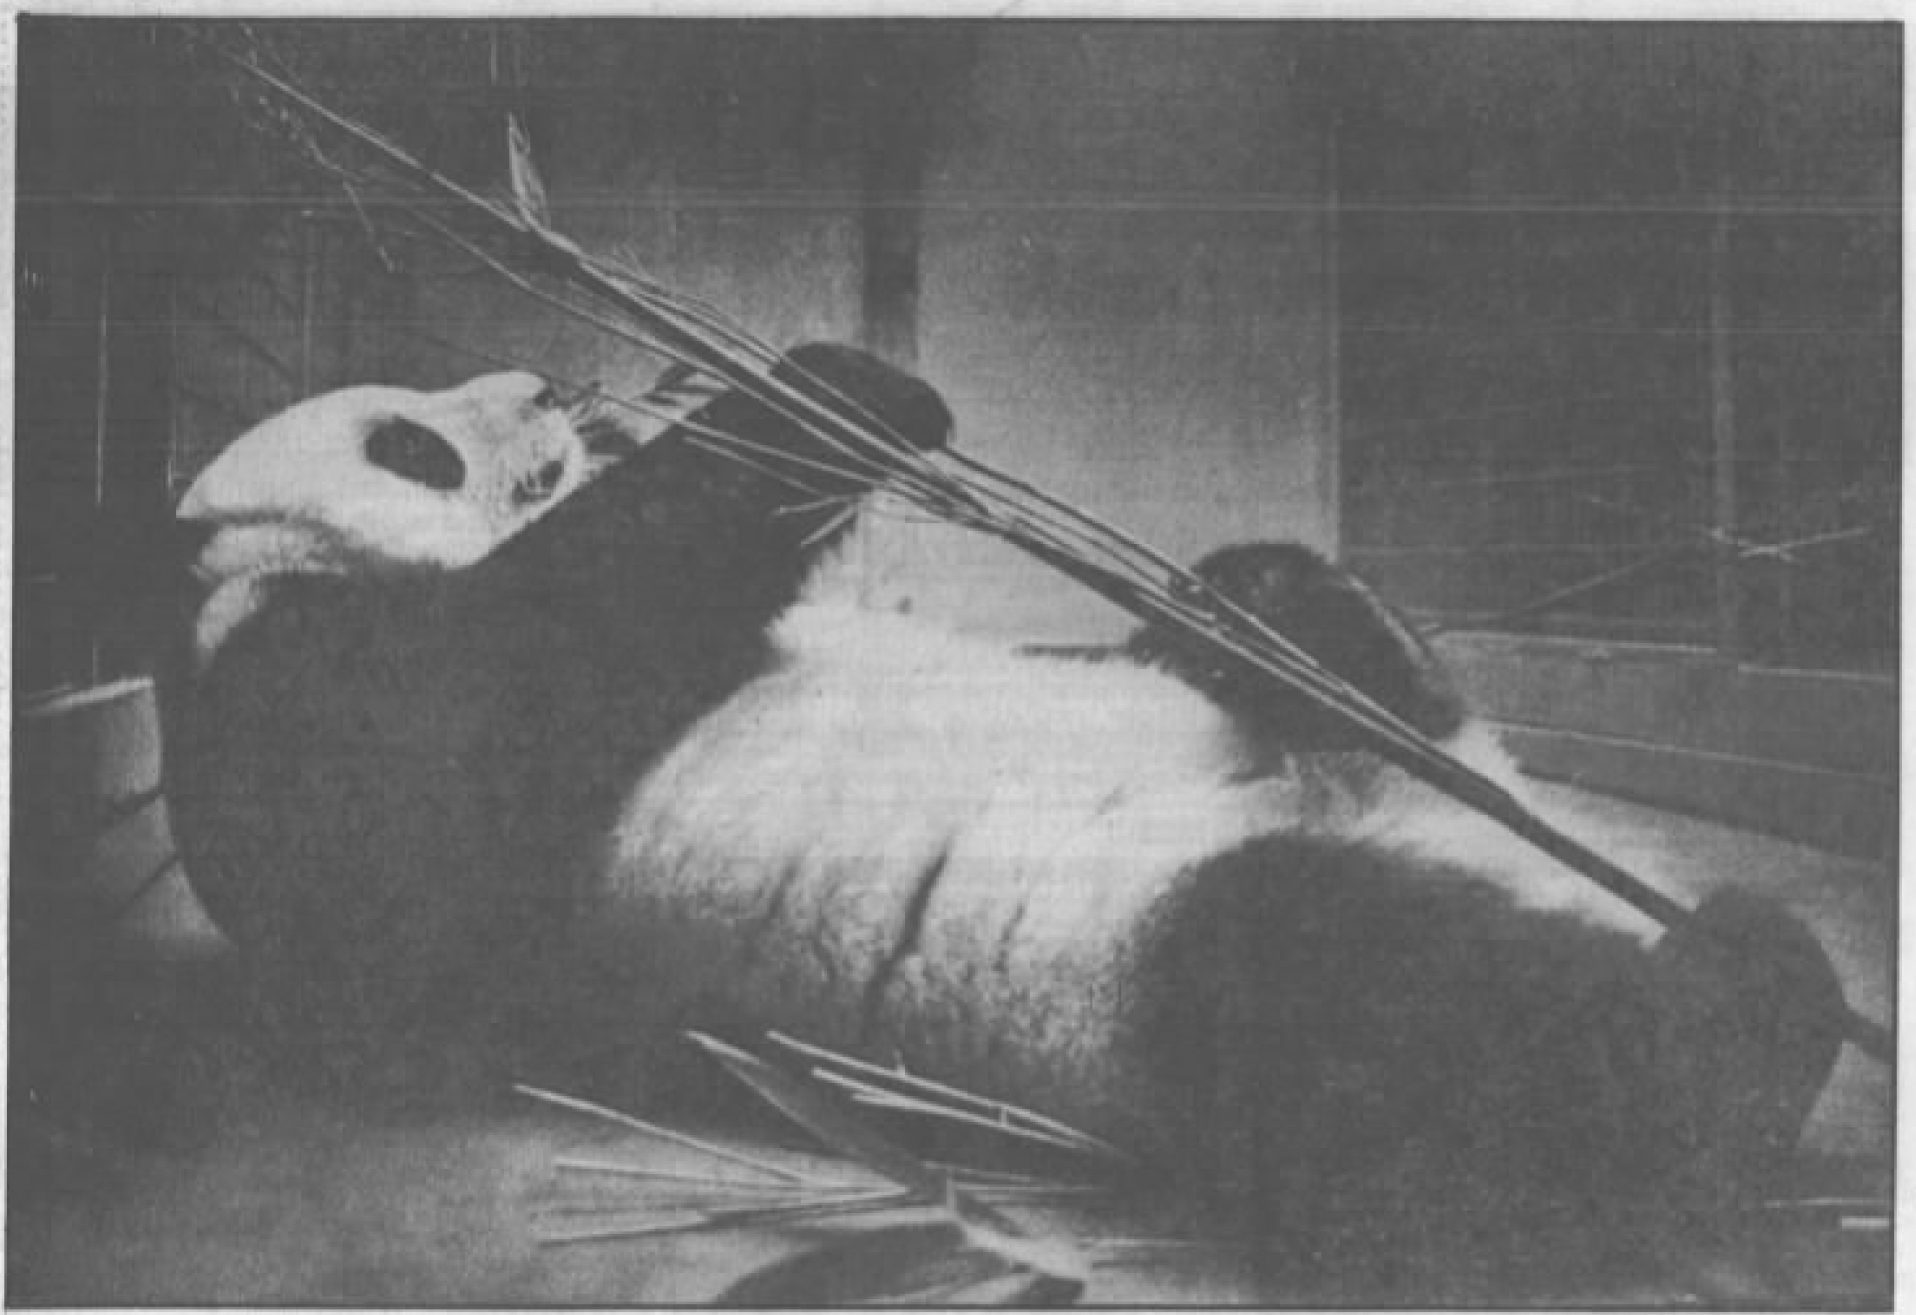 Giant panda reclines, chewing bamboo, in a zoo enclosure; image is monochromatic and grainy, like a newspaper photo.